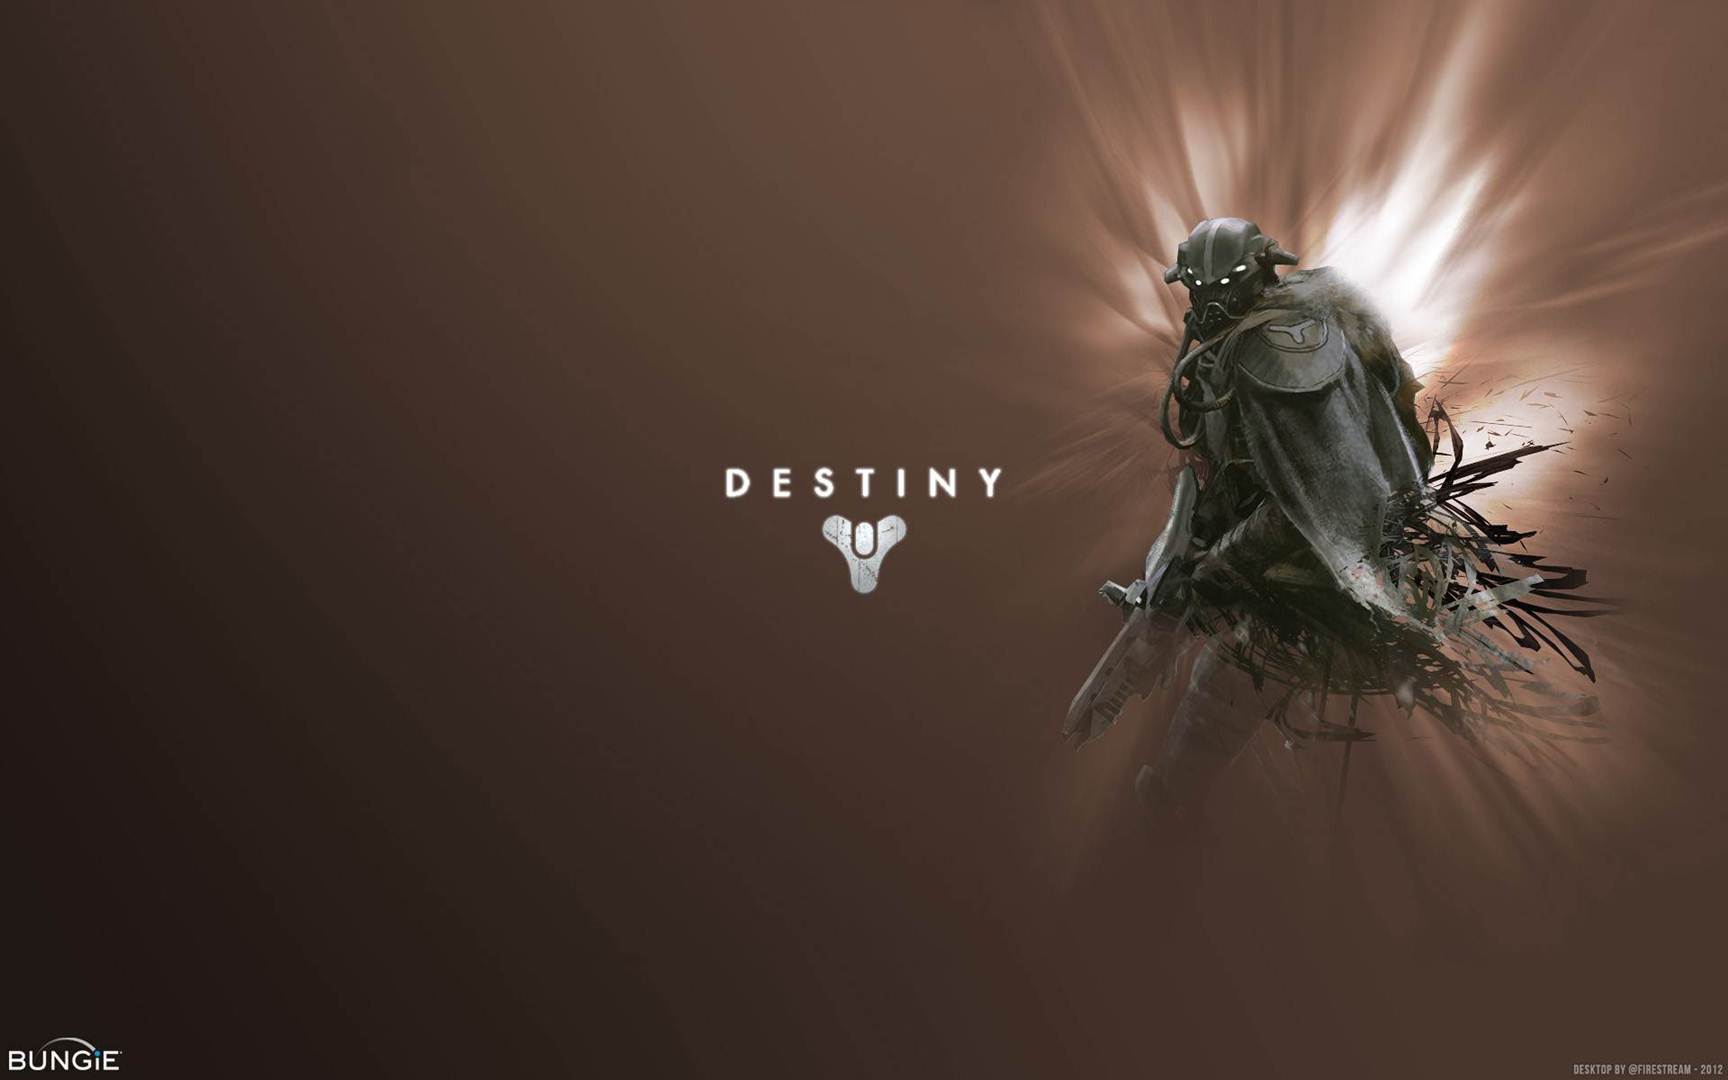 Destiny Bungie HD Wallpaper The Picture Pictures To